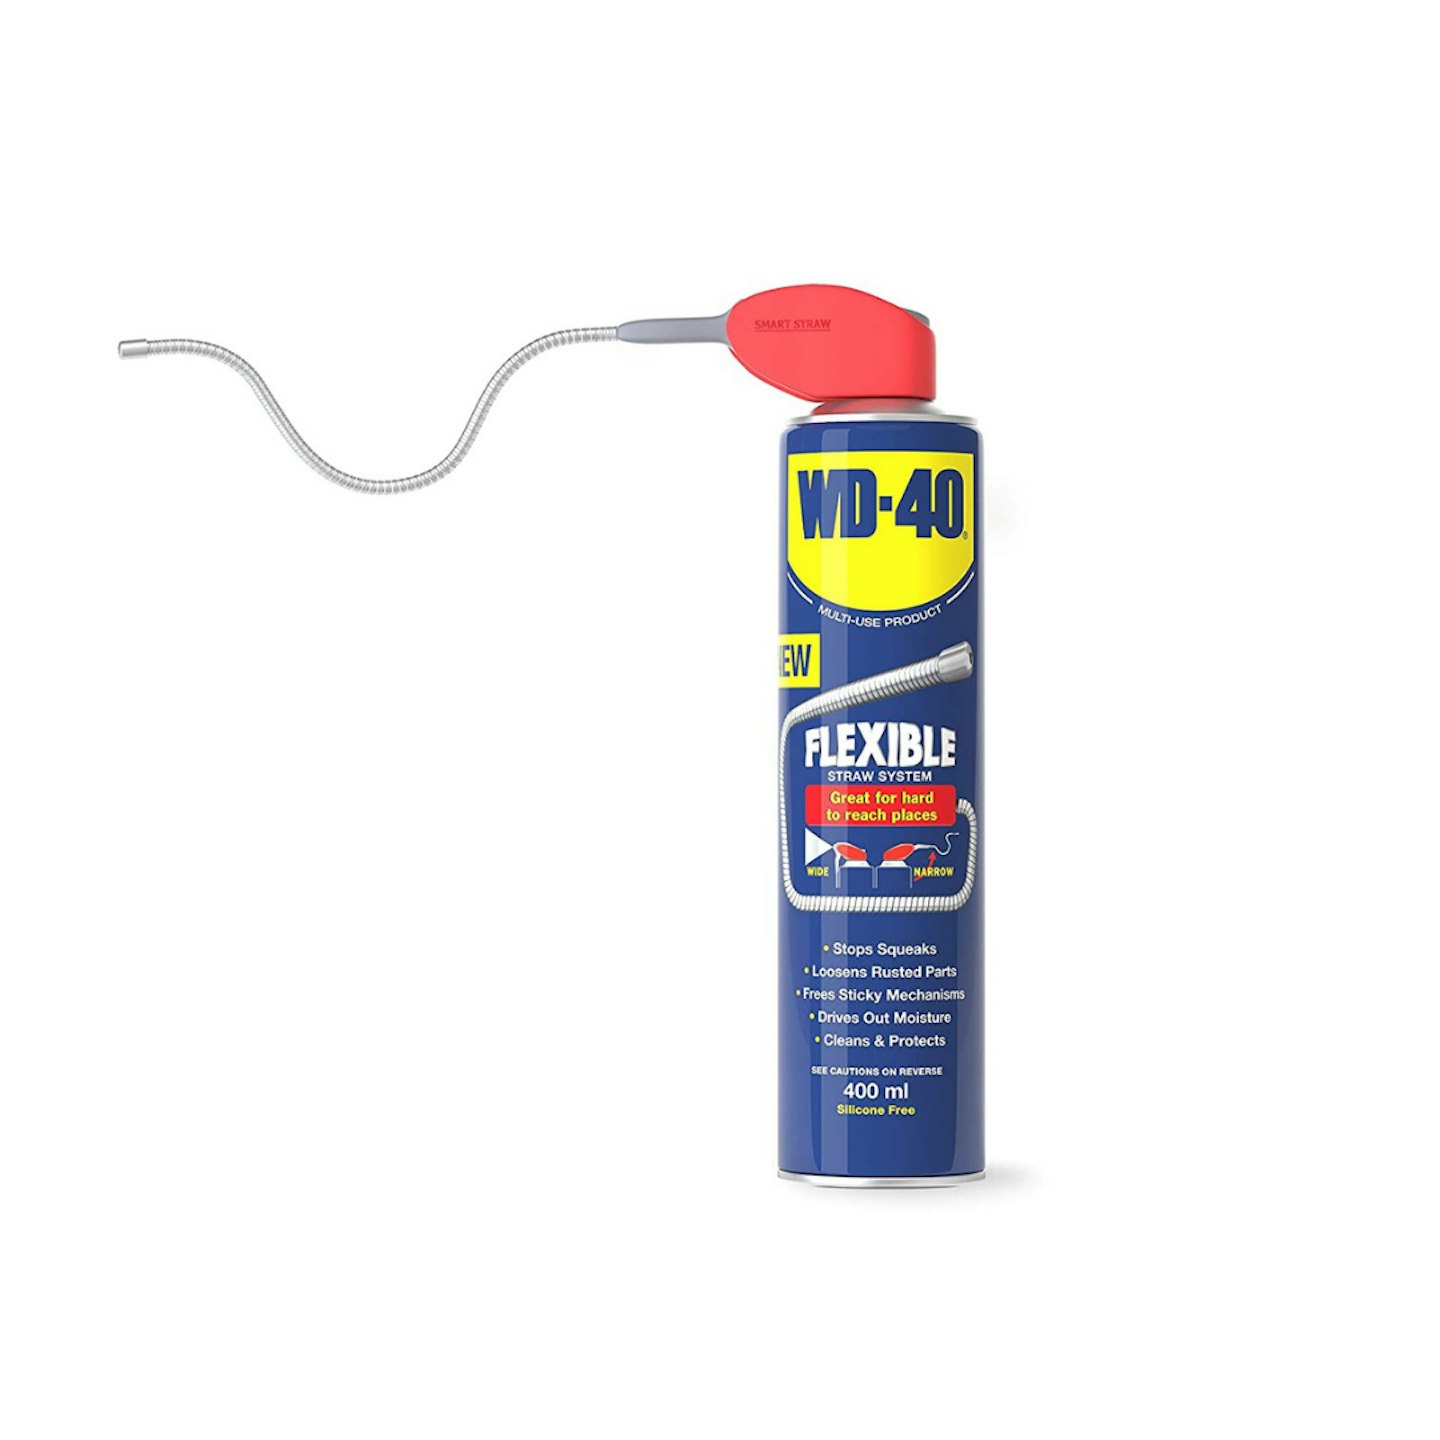 WD-40 Multi-Use Product Flexible Metal Straw